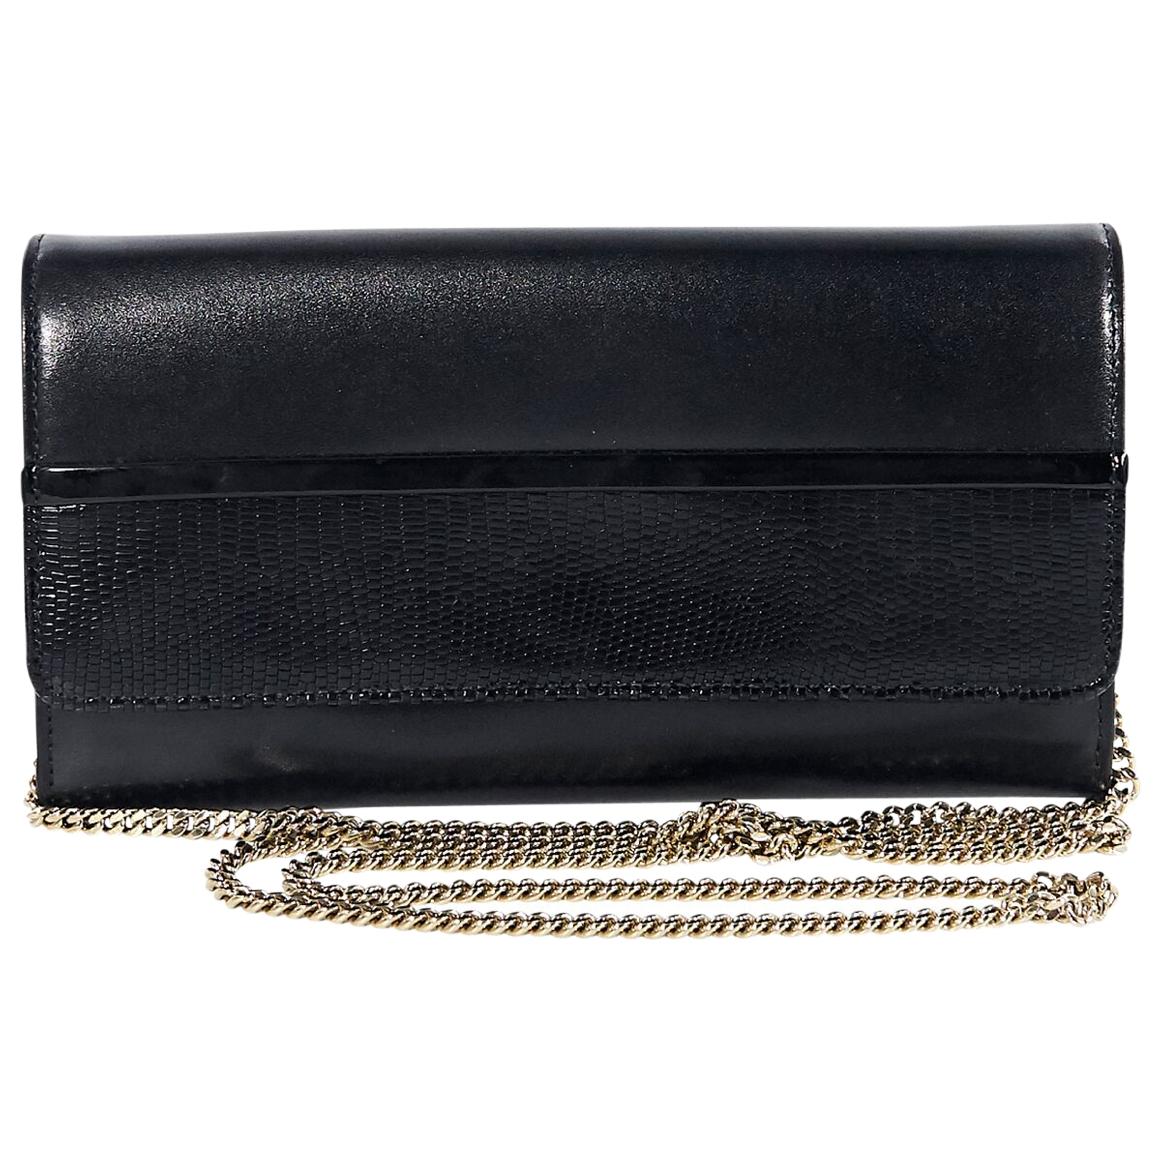 Lanvin Black Leather Wallet-On-A-Chain Bag